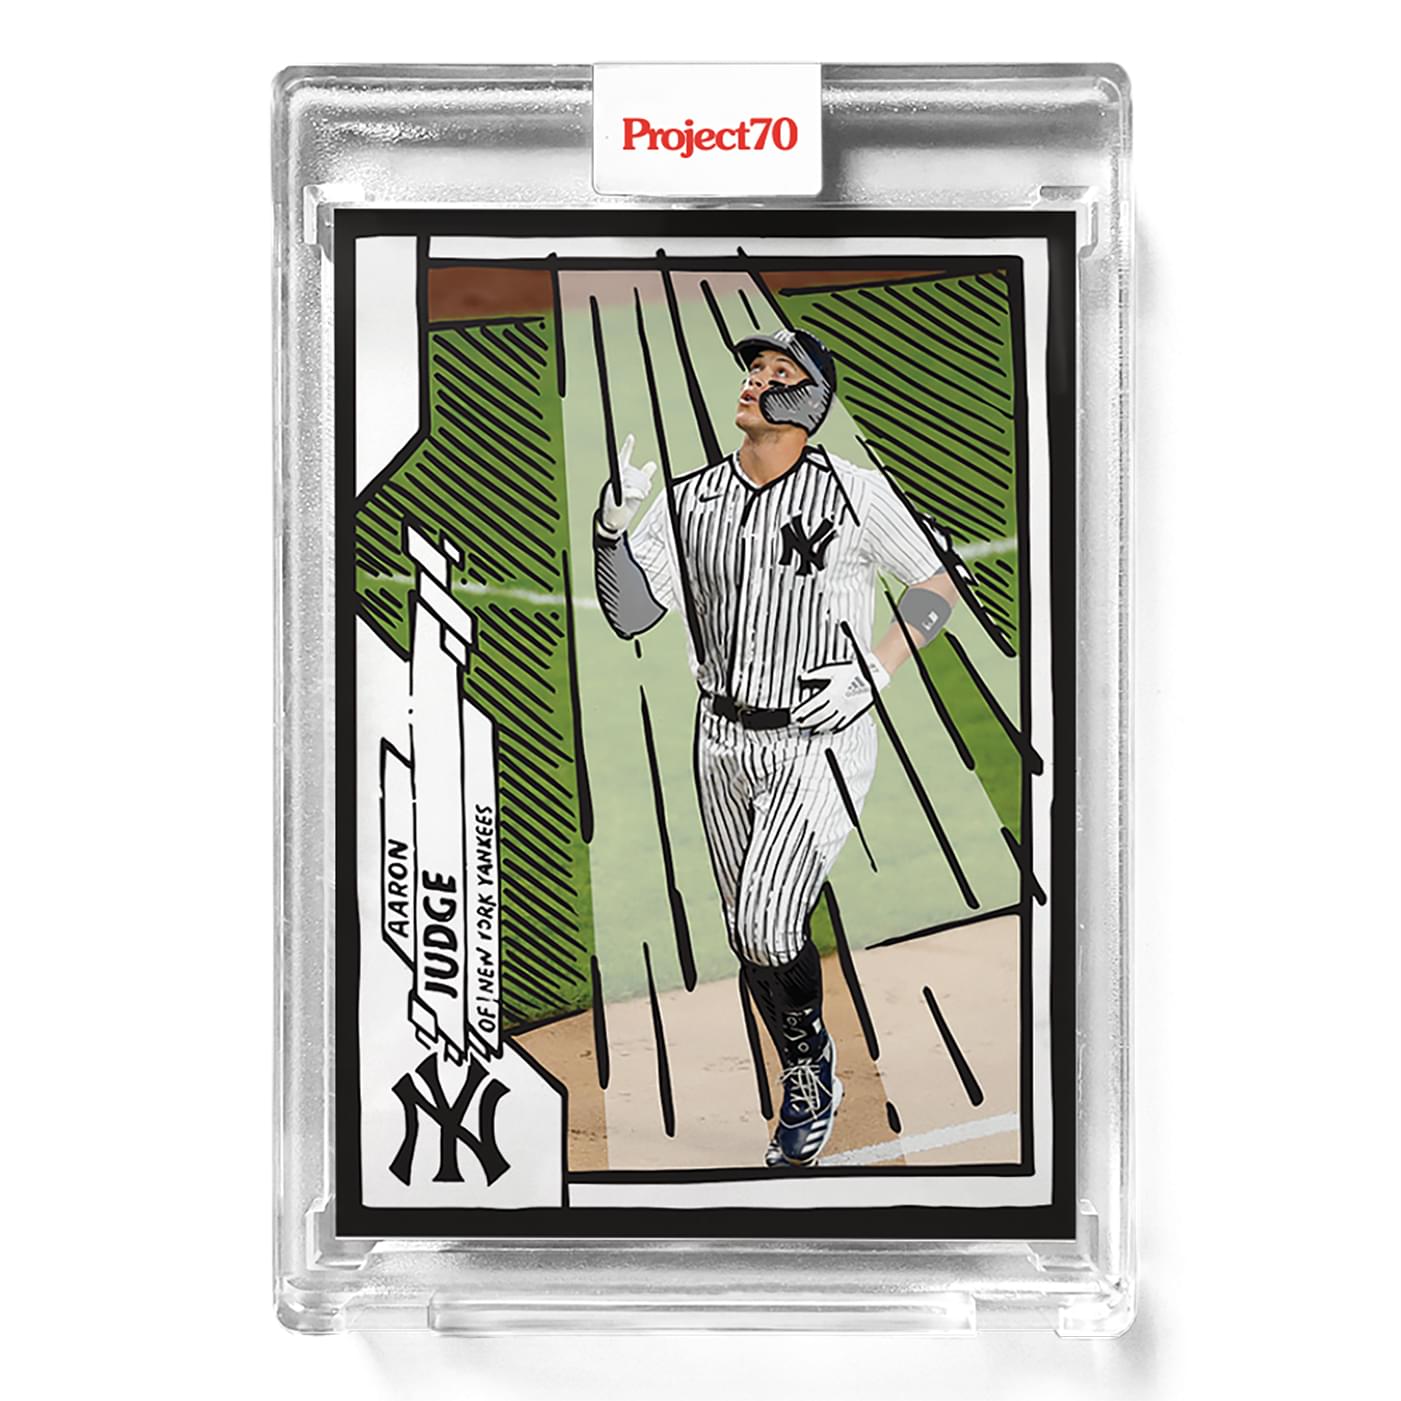 Topps Project70 Card 696 | Aaron Judge by Joshua Vides